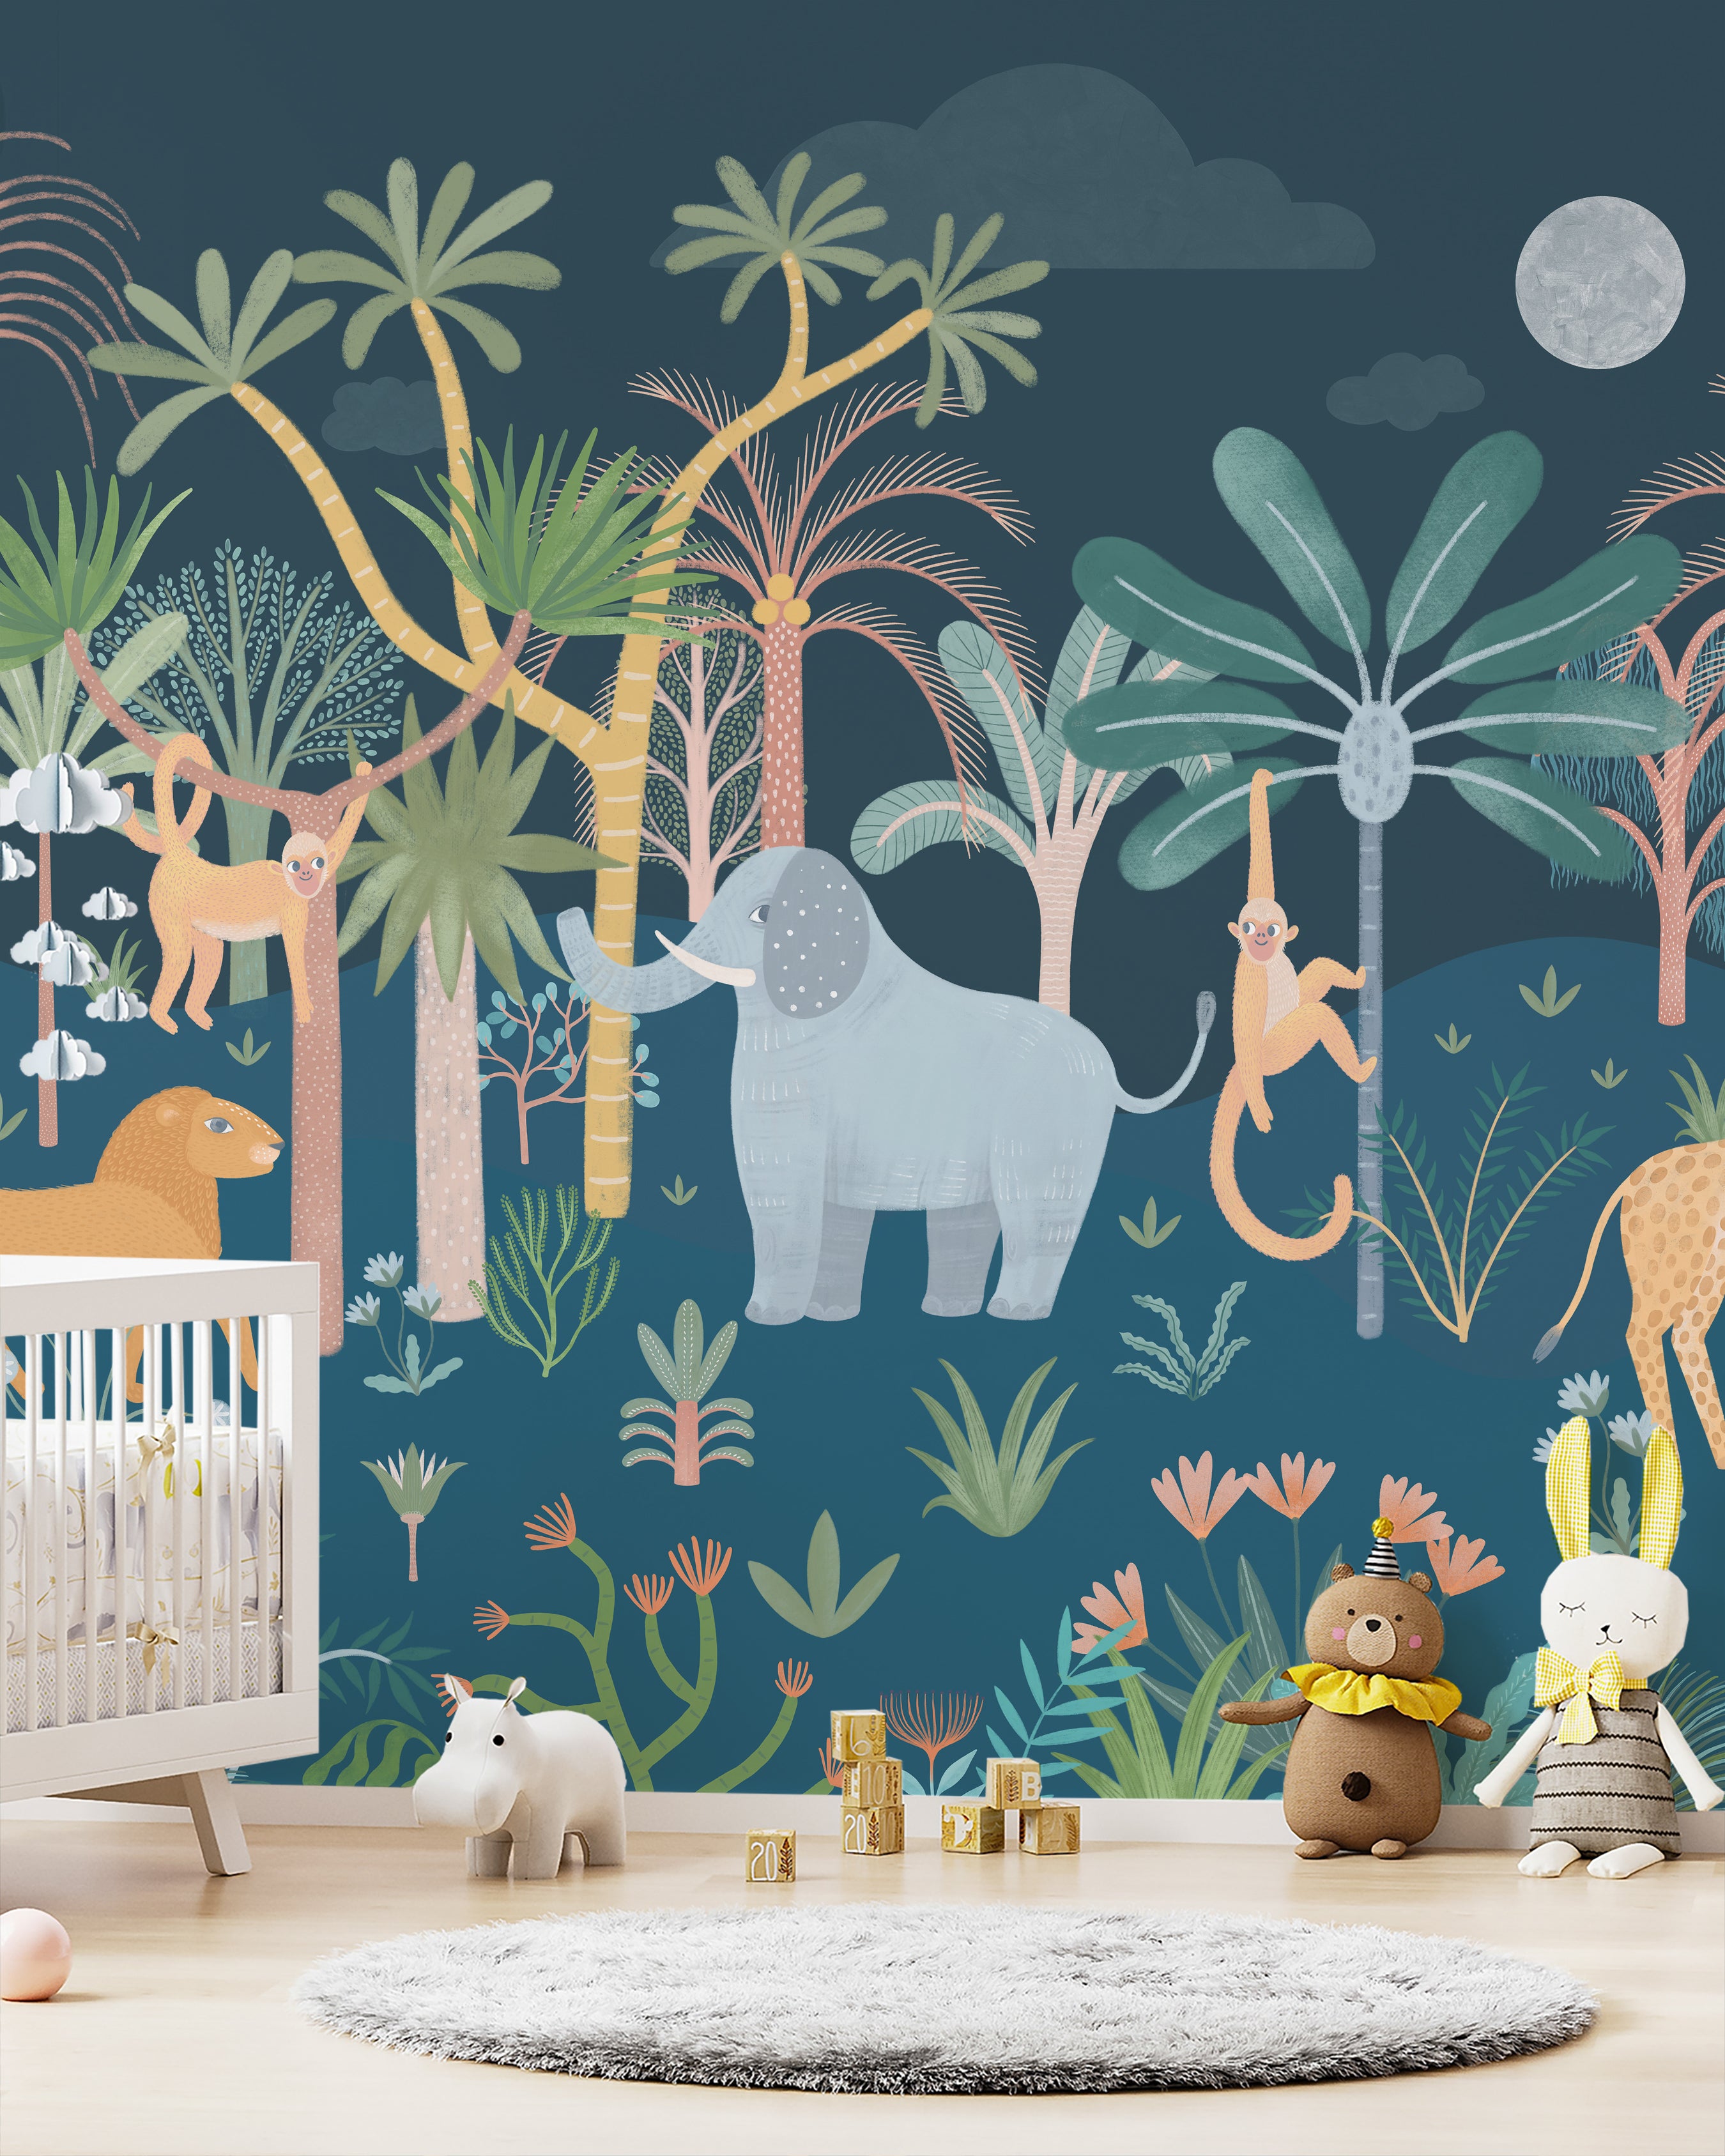 A nursery room transformed into a tropical paradise with the African Jungle Wallpaper Mural, displaying exotic animals and lush flora against a deep teal background, accompanied by children's toys and a crib